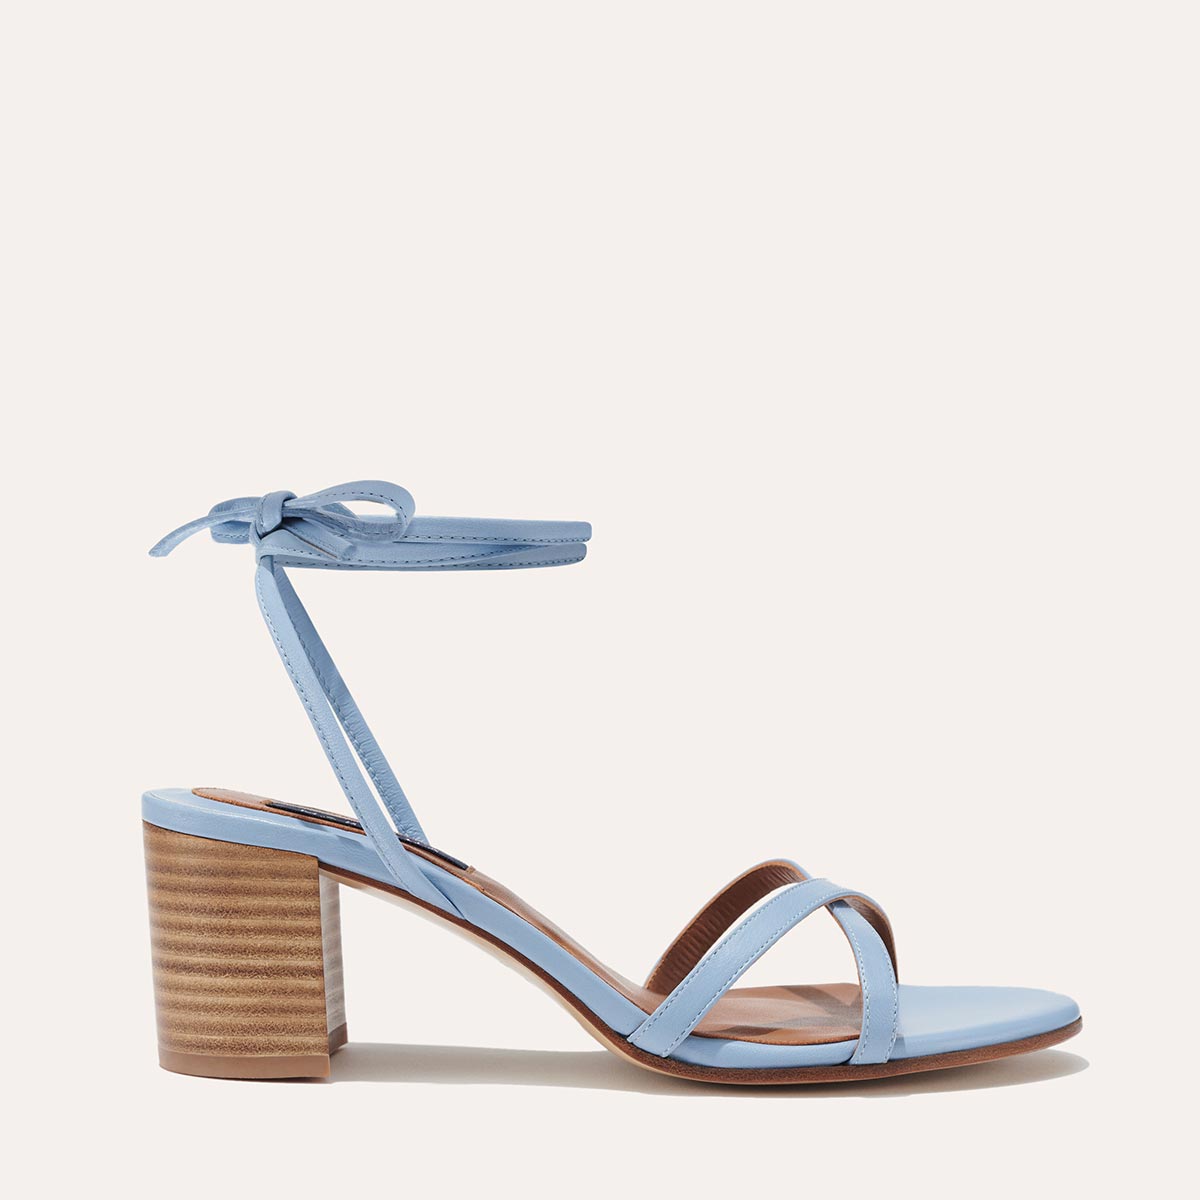 Margaux's strappy Soho Sandal with ankle ties, made in Spain from soft, blue Italian nappa leather